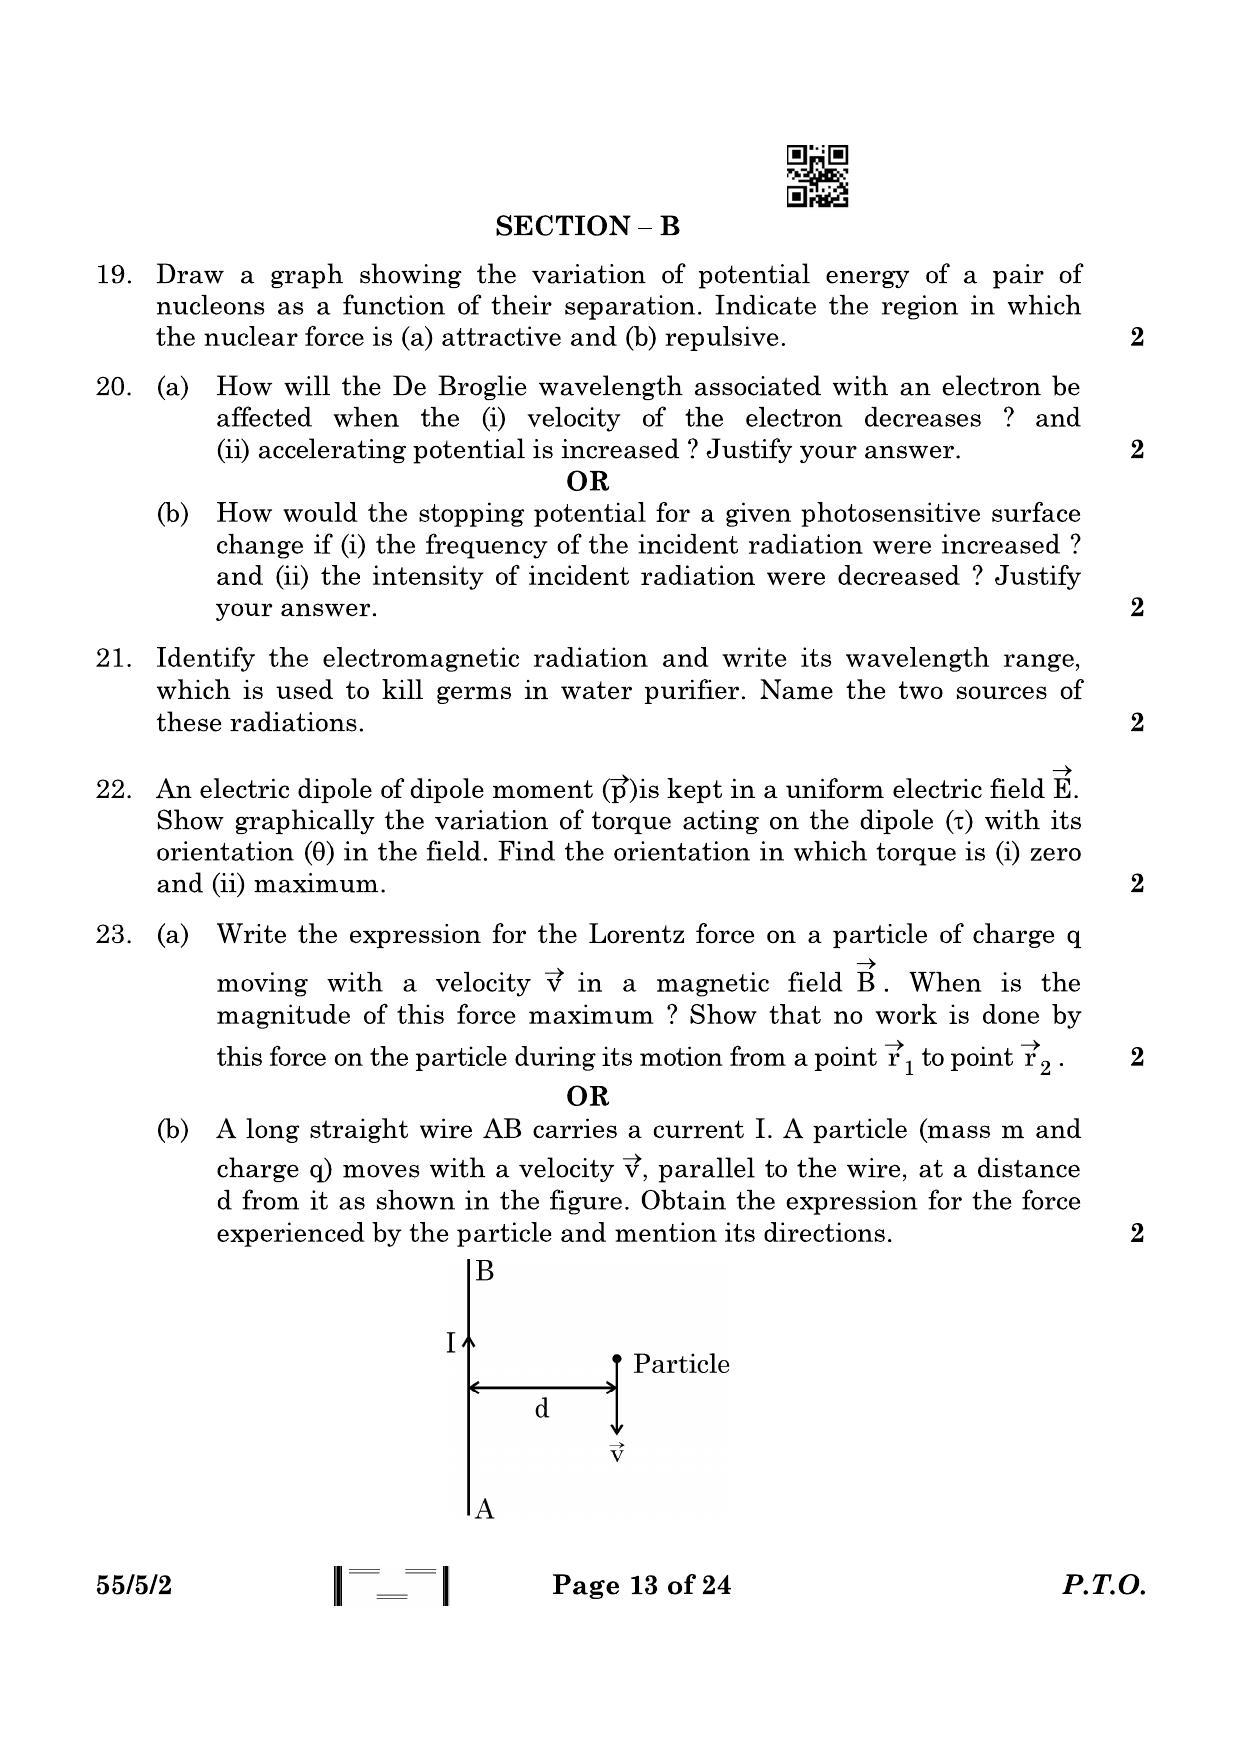 CBSE Class 12 55-5-2 Physics 2023 Question Paper - Page 13